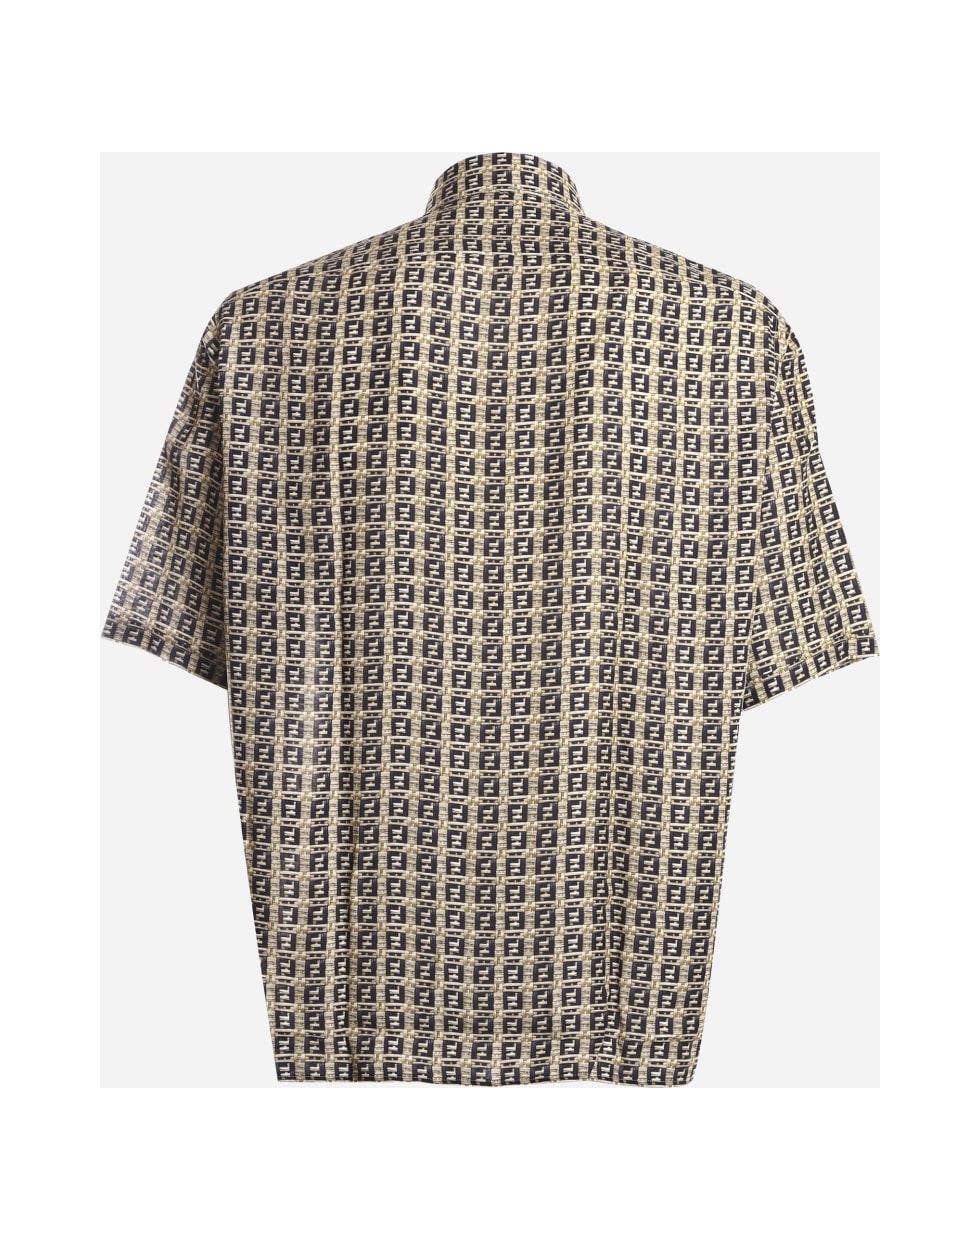 Fendi Oversized Shirt With All-over Ff Motif - Beige